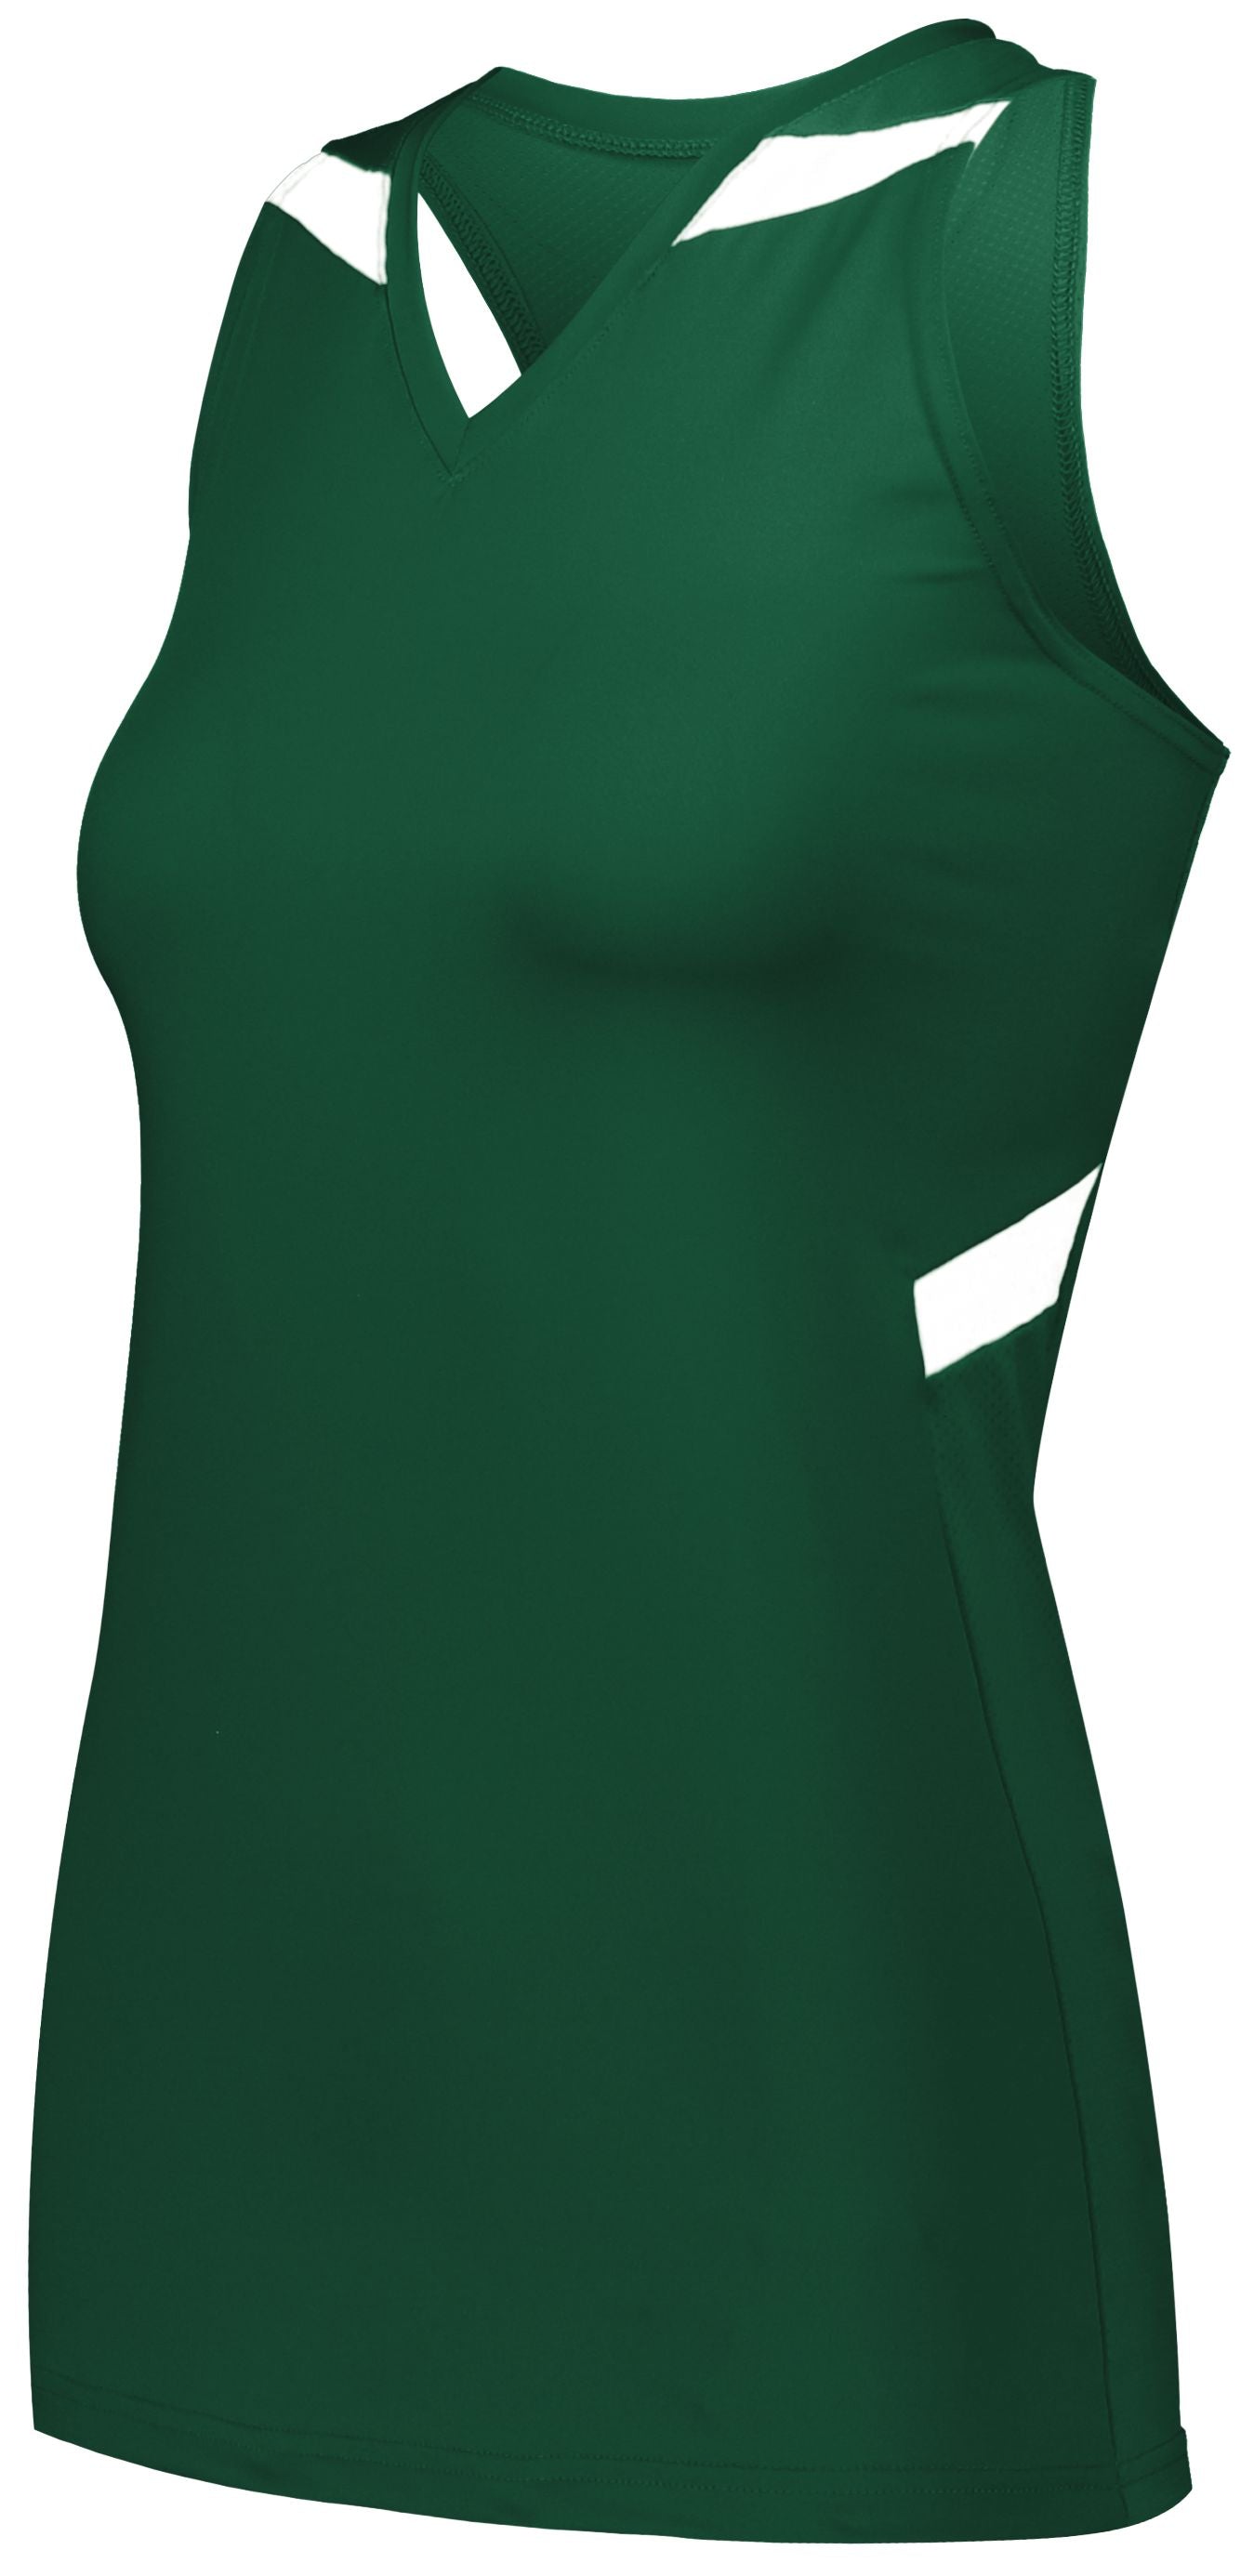 Holloway Ladies Pr Max Compression Jersey in Dark Green/White  -Part of the Ladies, Ladies-Jersey, Track-Field, Holloway, Shirts product lines at KanaleyCreations.com